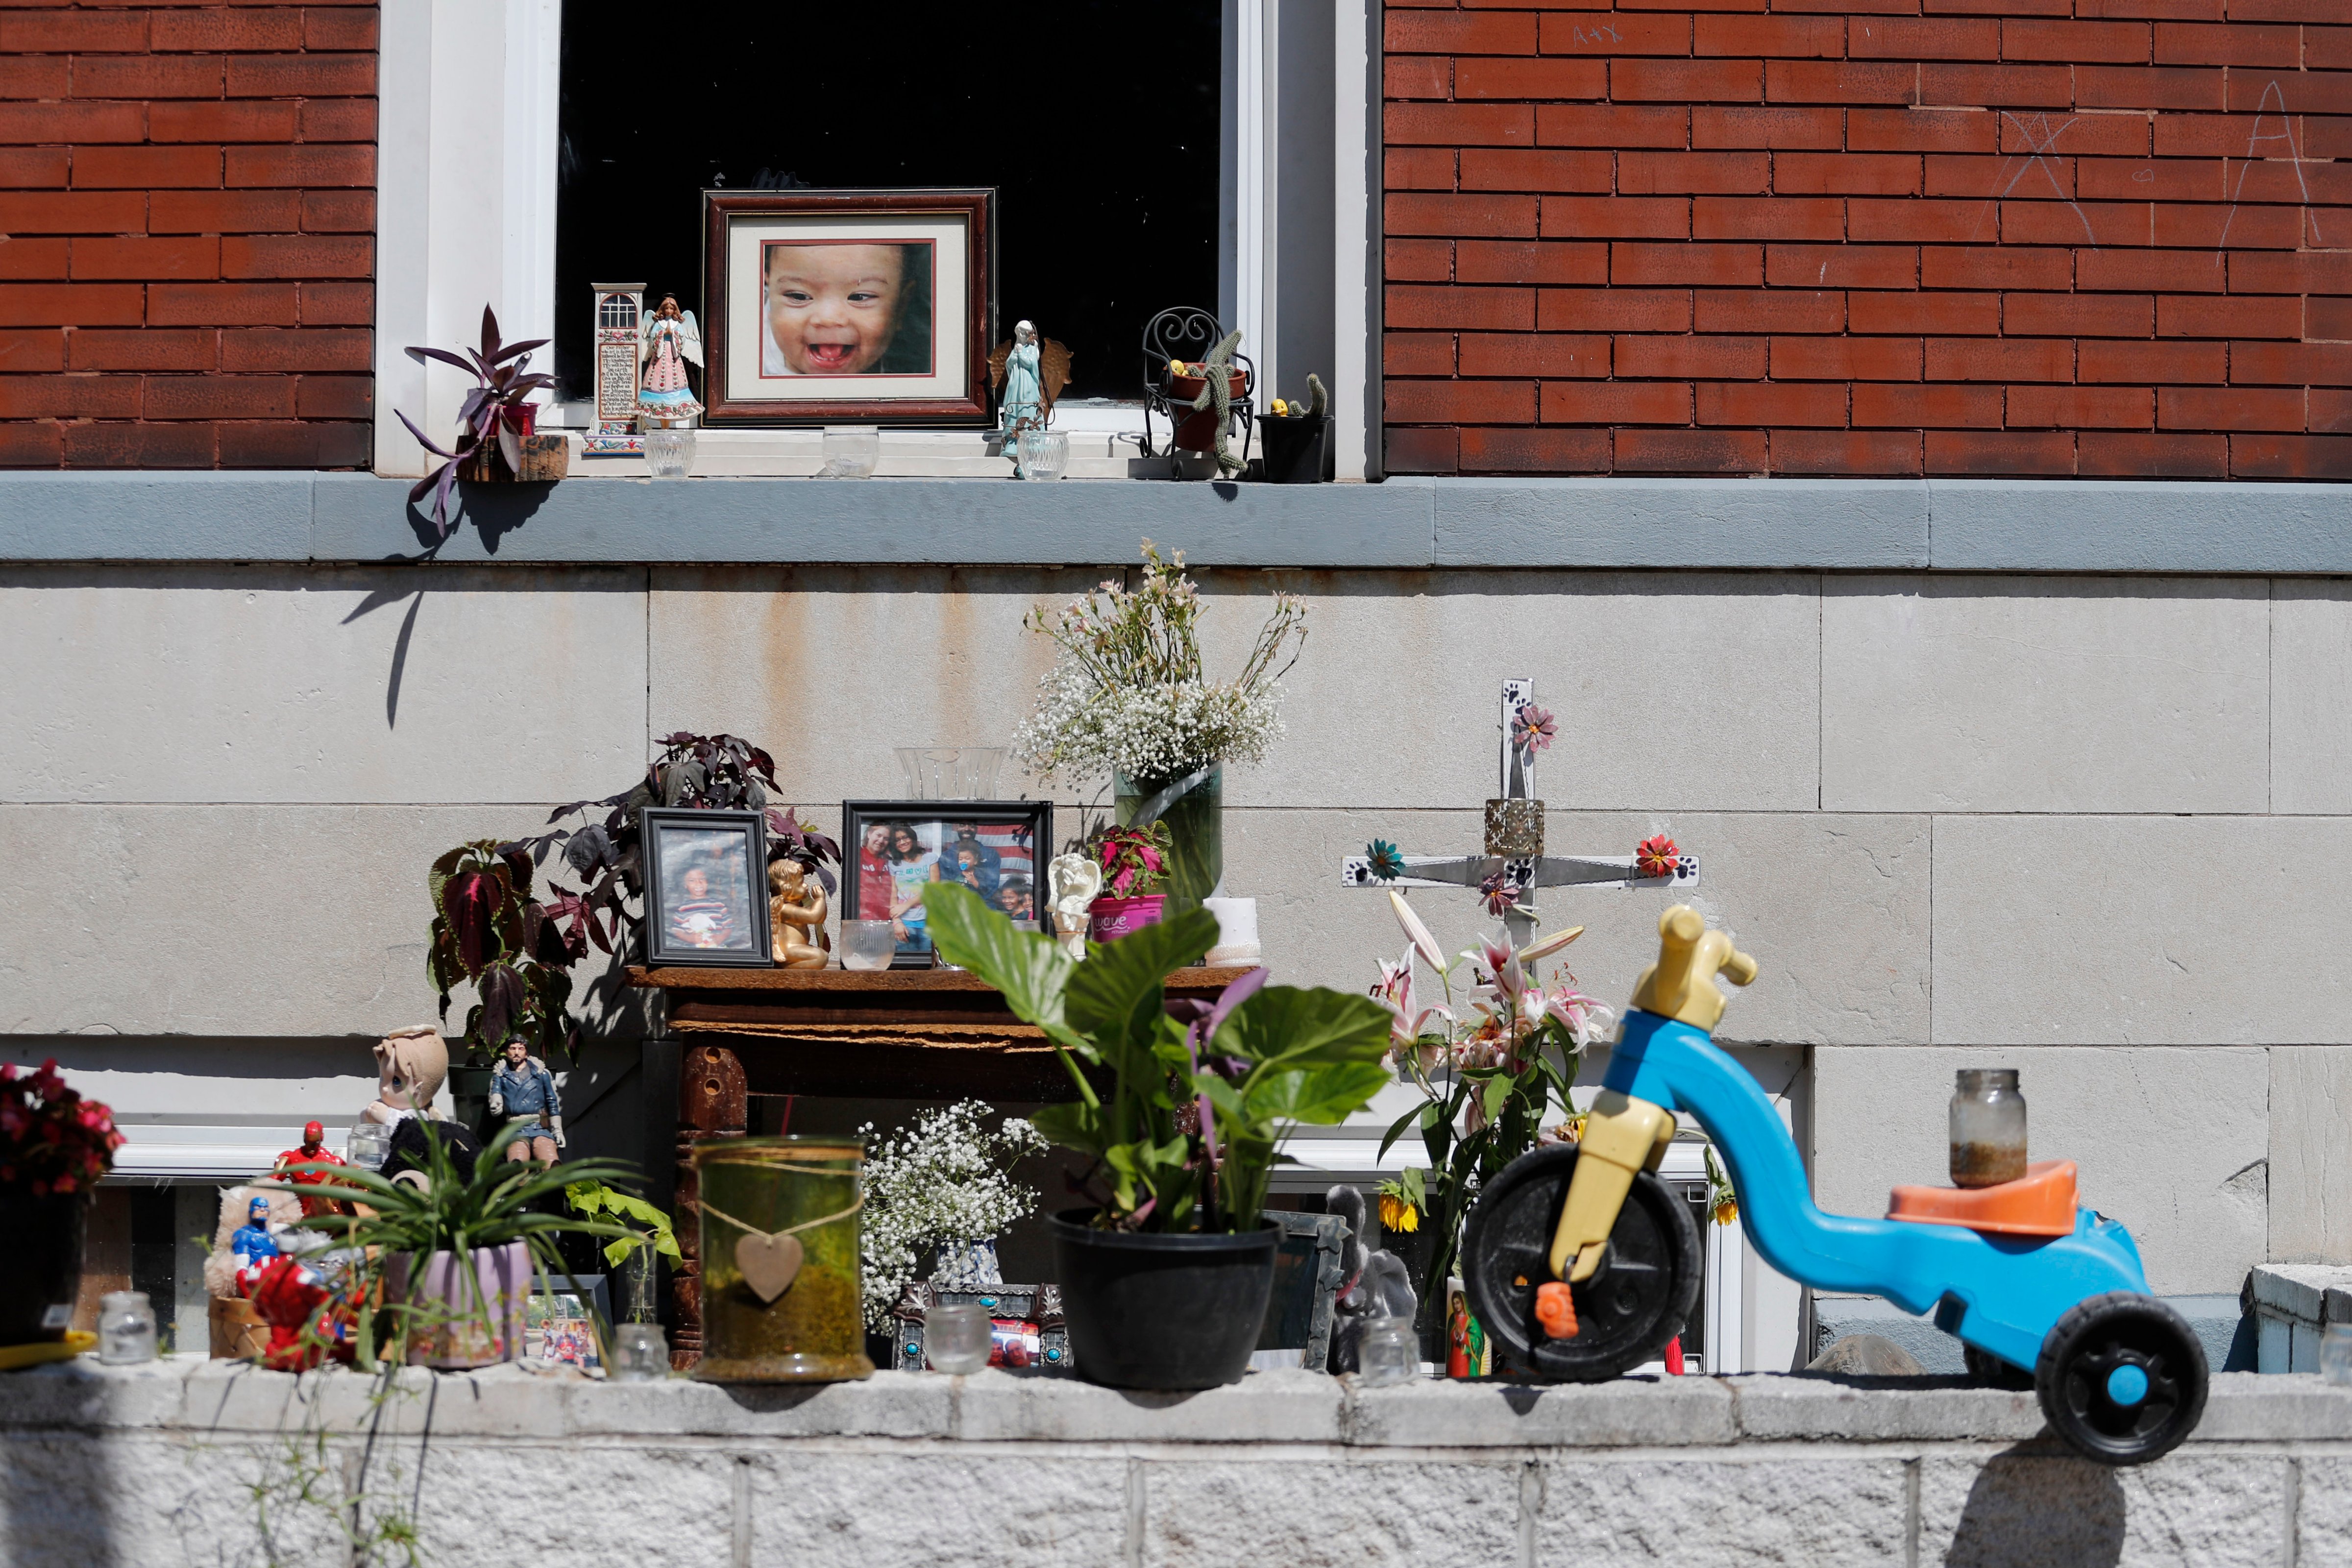 In this Wednesday, Aug. 28, 2019 photo, a memorial to Xavier Usanga, 7, who was shot and killed earlier this month while playing with his sisters in their backyard, is seen outside his home in St. Louis. Civic leaders and parents alike are desperately seeking a way to curb the gun violence that has killed at least a dozen children in the high-crime city already this year. (Jeff Roberson—AP)